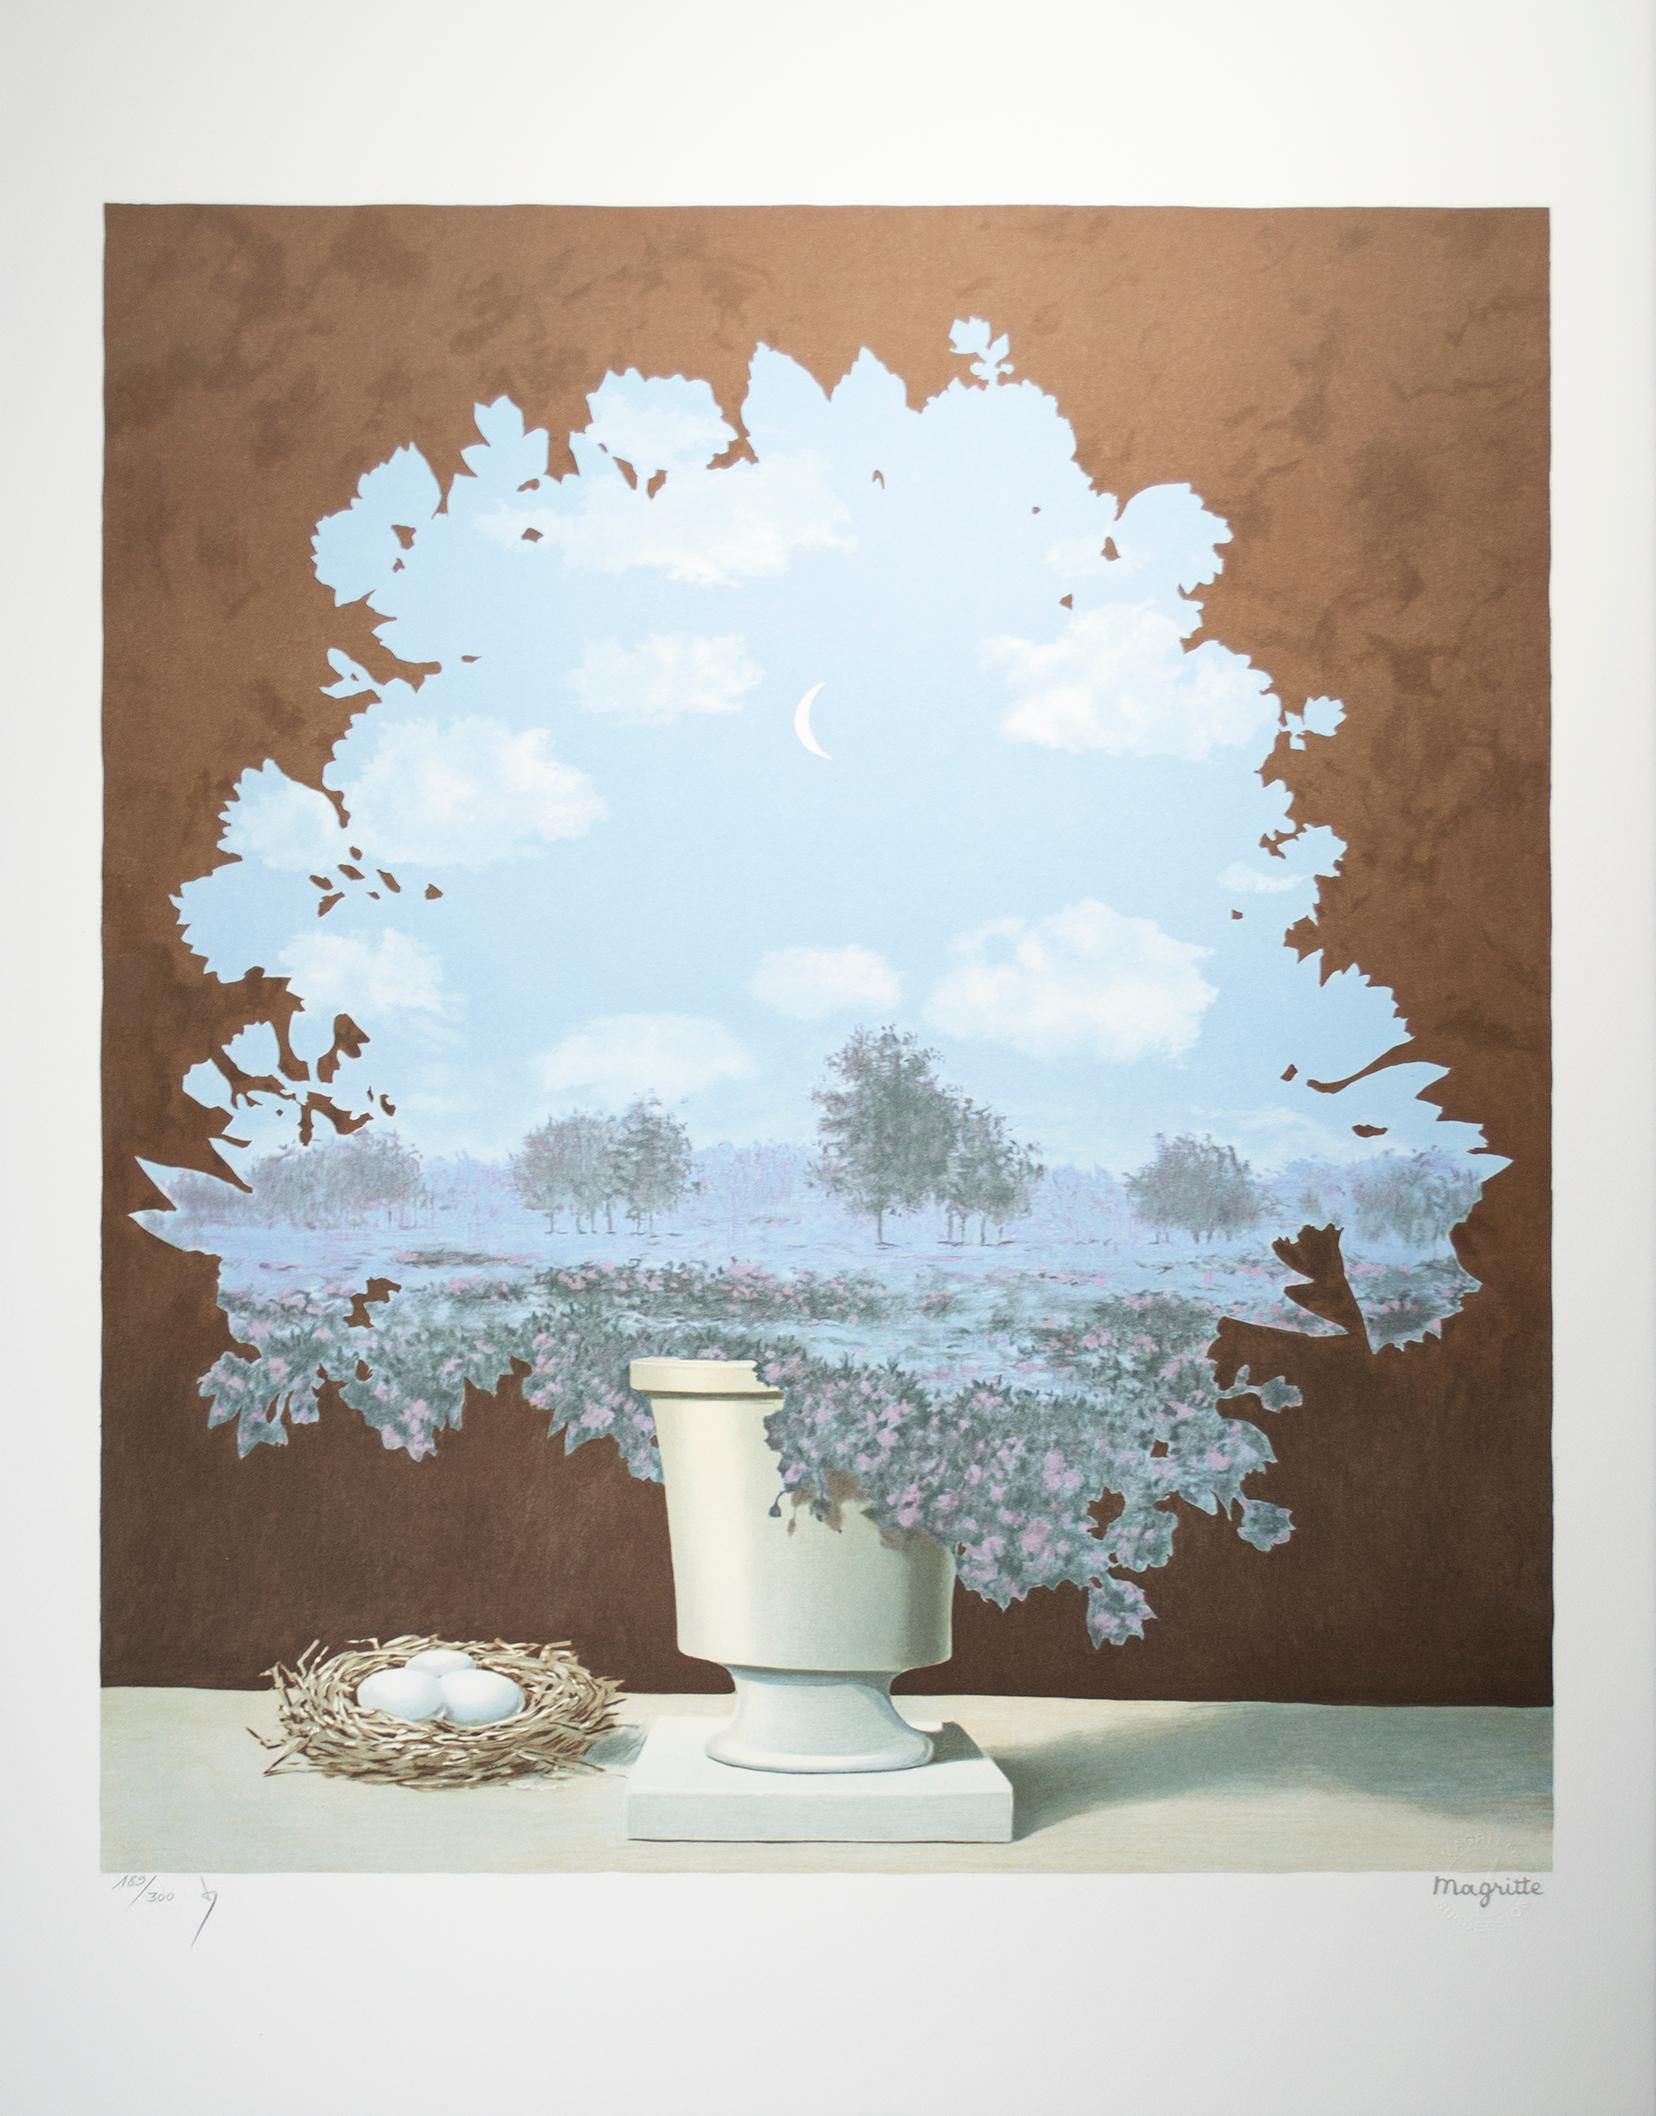 (after) René Magritte Still-Life Print - "Le Pays des Miracles (The Land of Miracles), " Lithograph after Rene Magritte